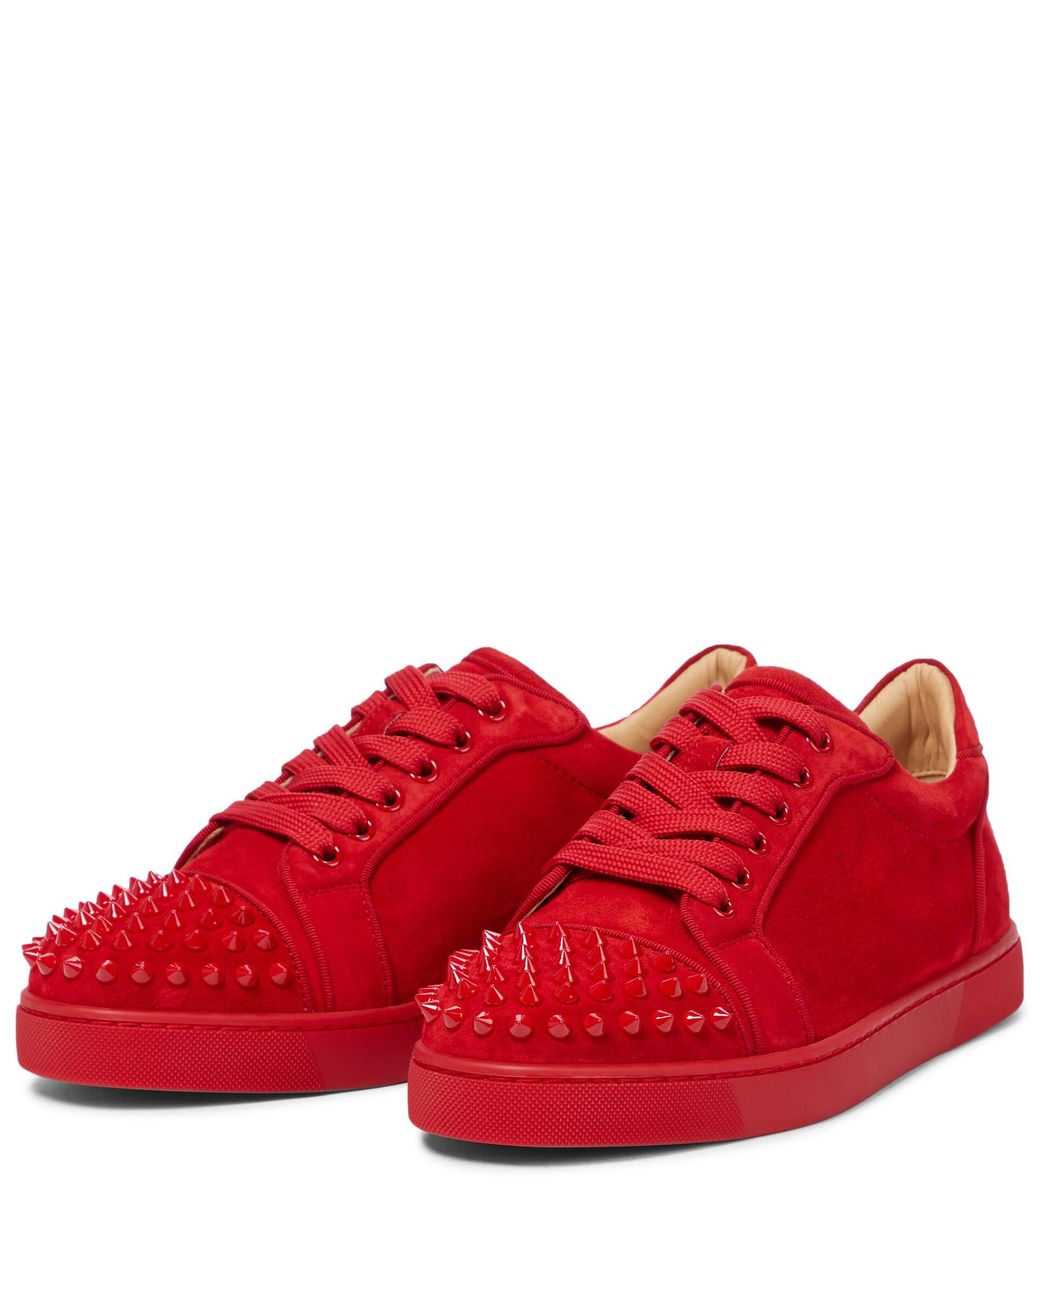 Sneakers Super Lou Spikes in canvas Mytheresa Donna Scarpe Sneakers Sneakers alte 